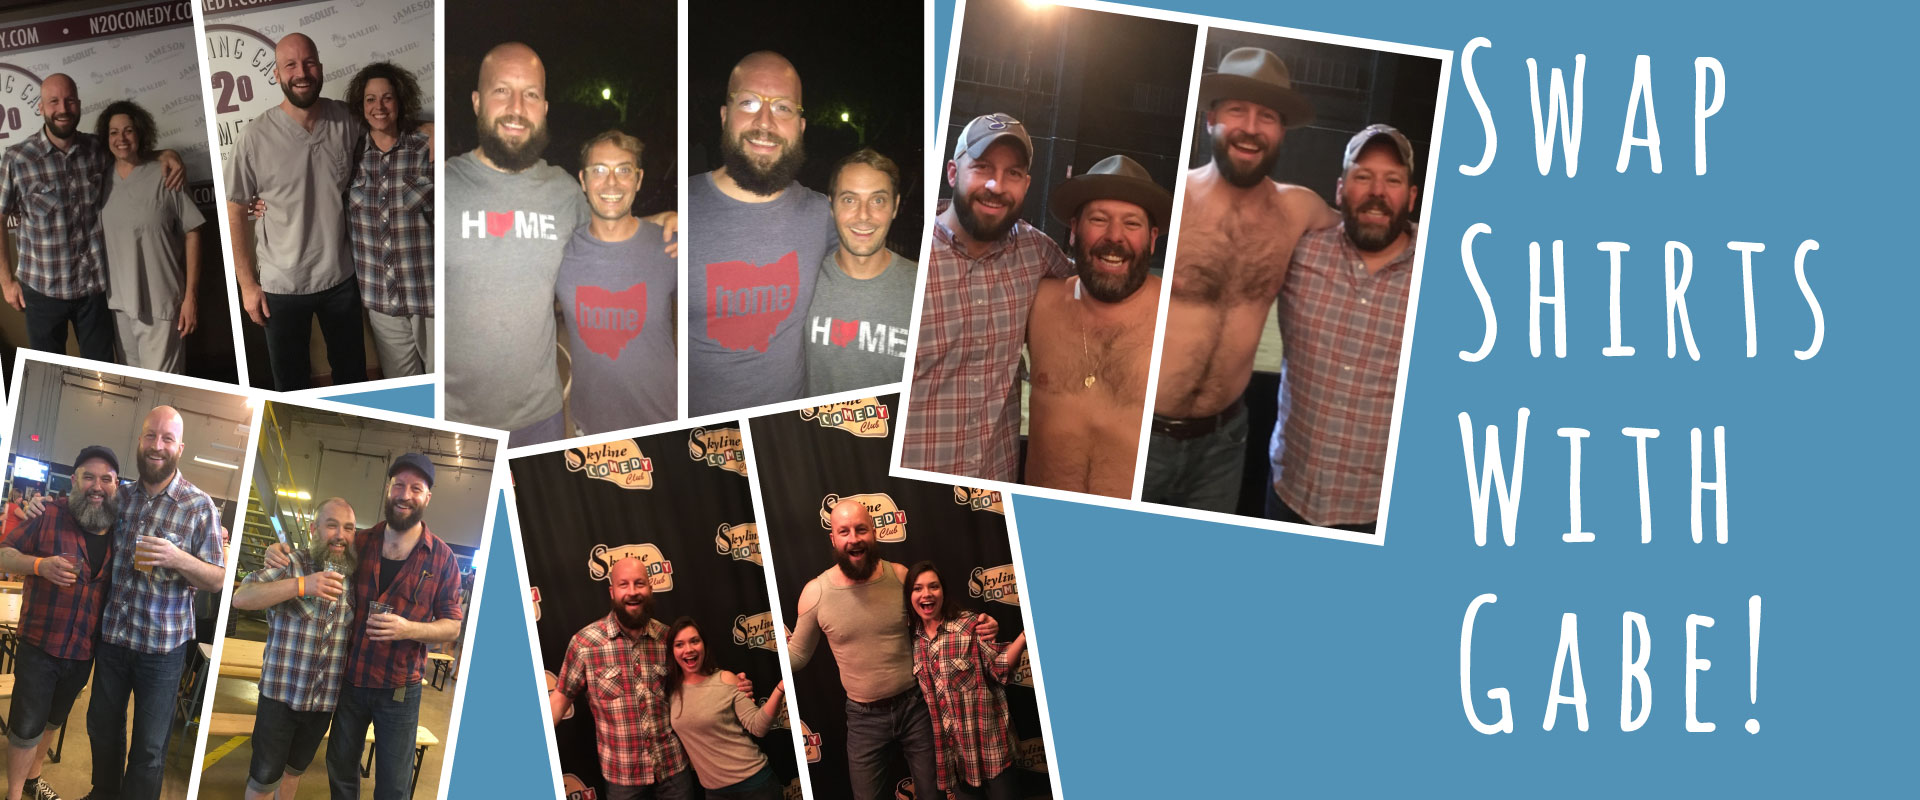 Swap shirts with Stand up Comedian after his stand up comedy performances! See how to have your picture of performing a shirt swap with stand up comedian Gabe Kea!